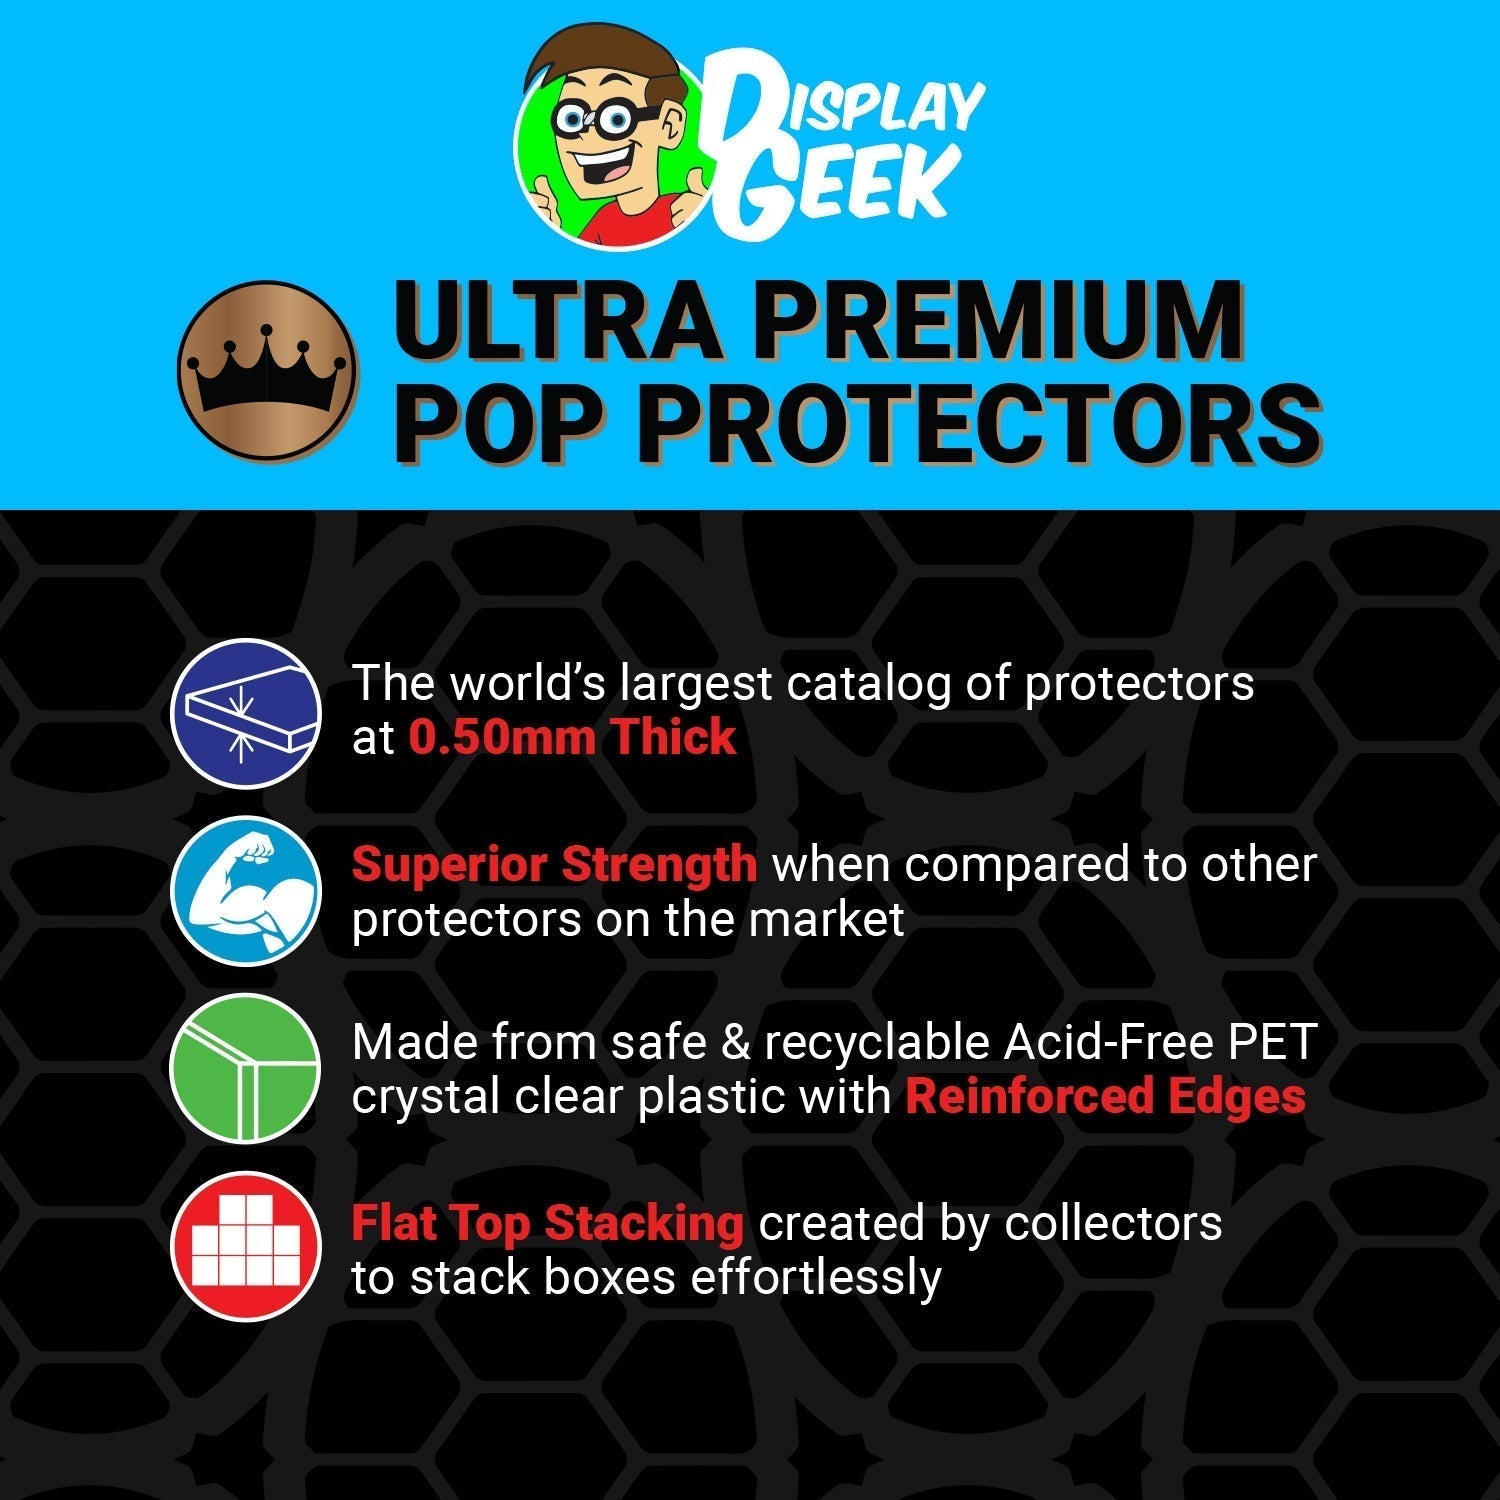 Pop Protector for Ron, Harry & Hermione #14 Funko Pop Movie Posters - PPG Pop Protector Guide Search Created by Display Geek